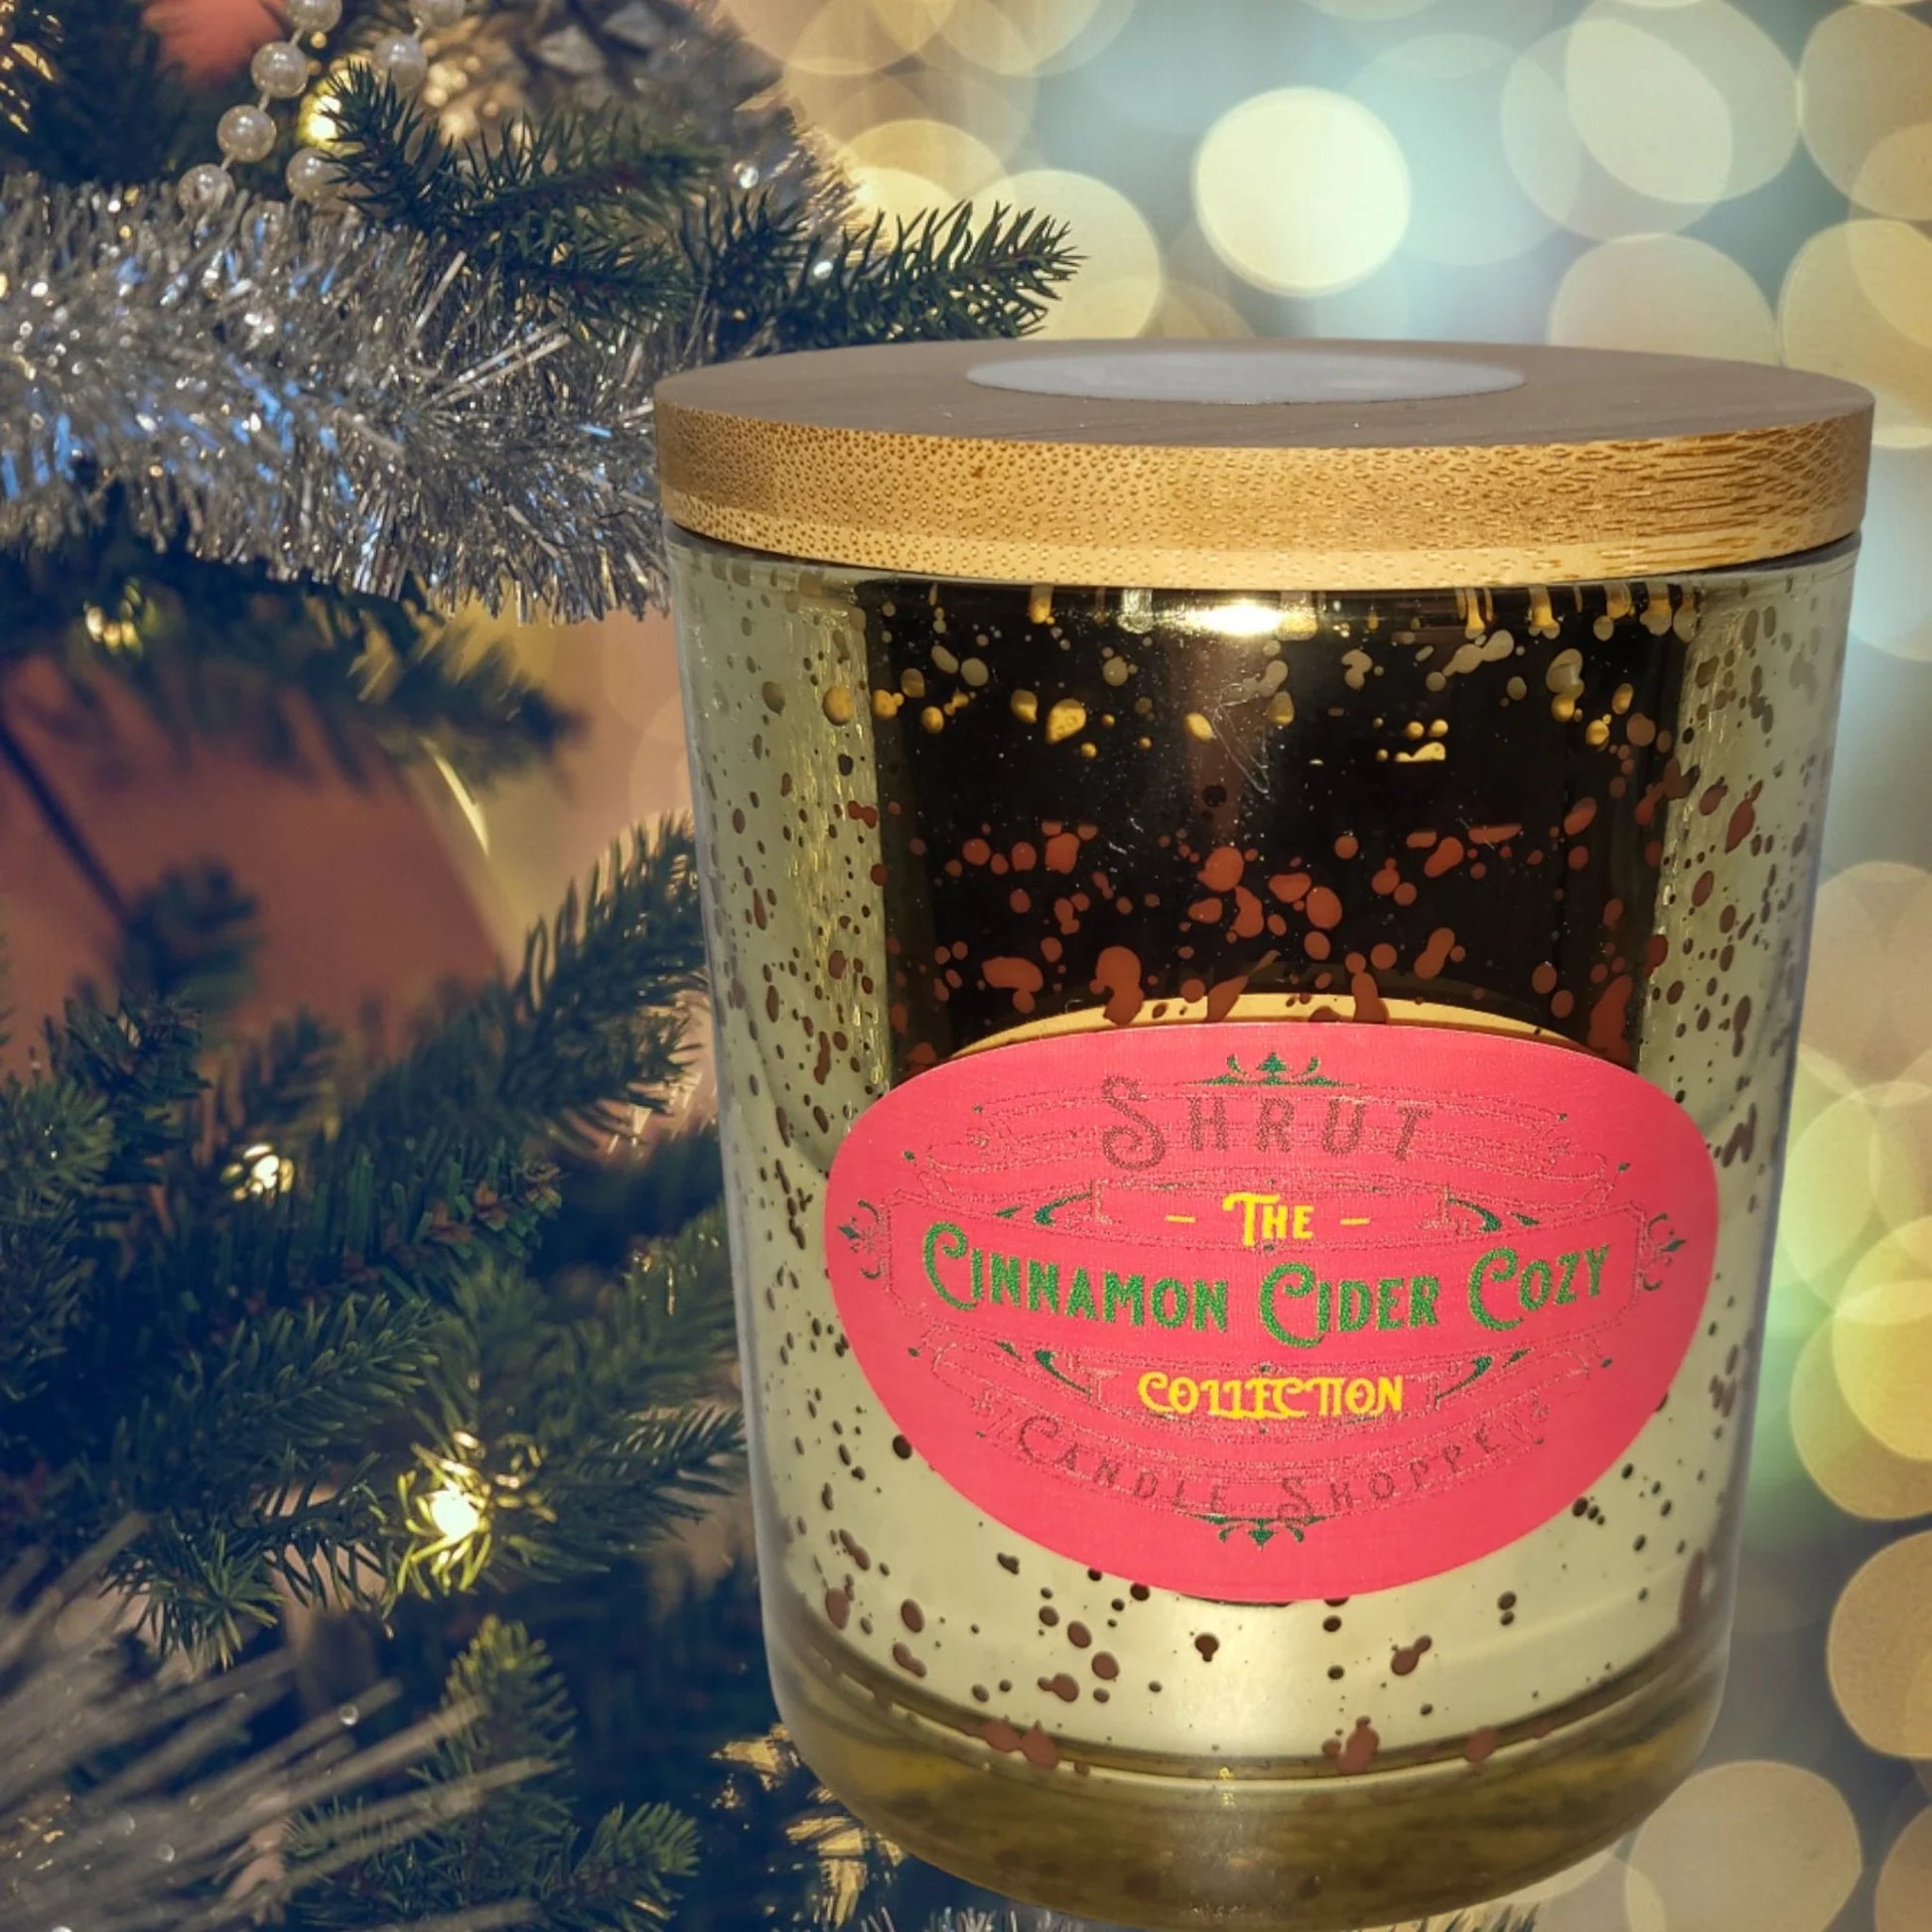 Cinnamon Cider Cozy Homemade, Hand-Poured Scented Candle